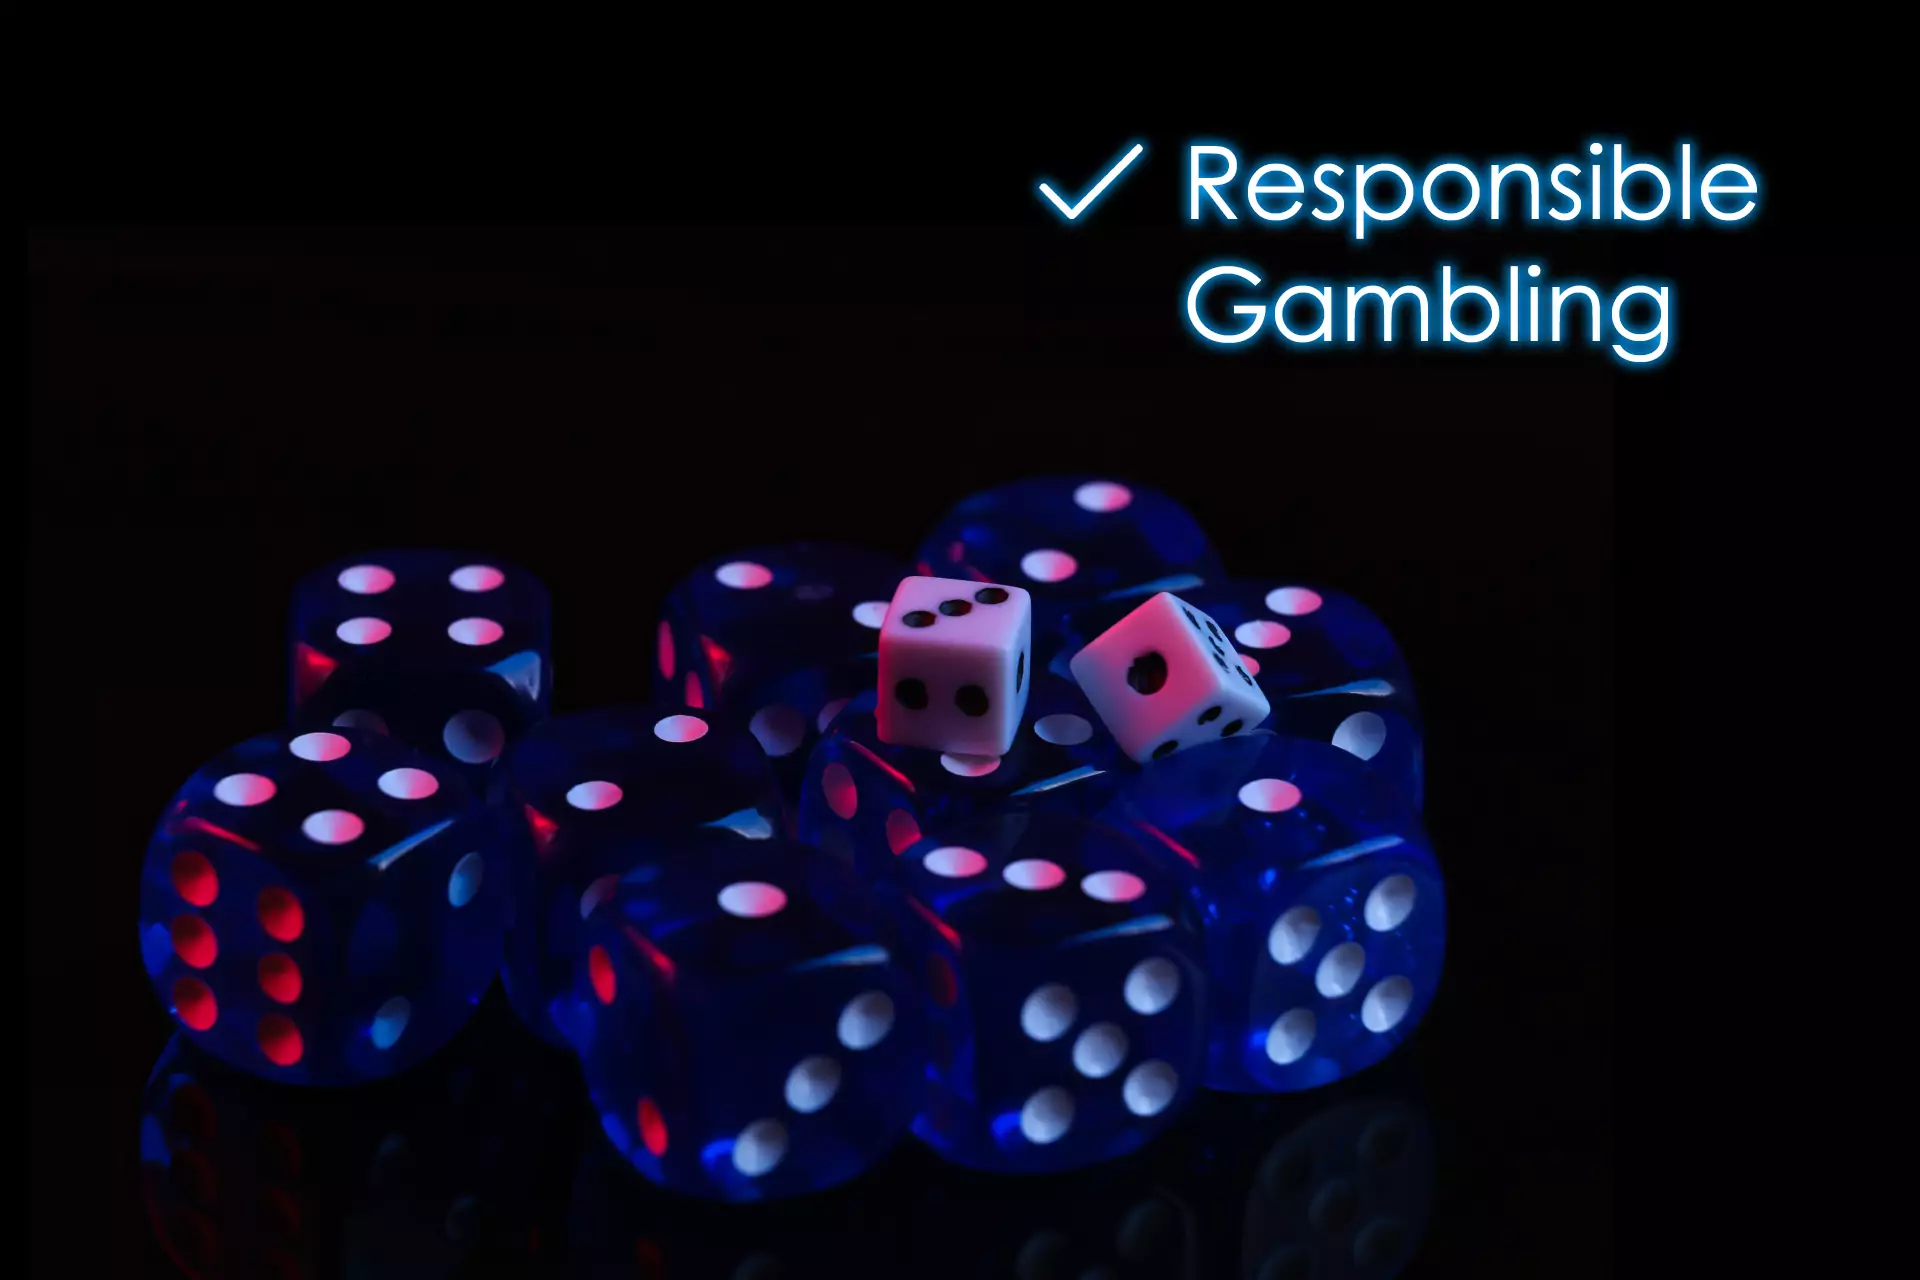 If you start play casino games be aware of the responsible gambling policy.